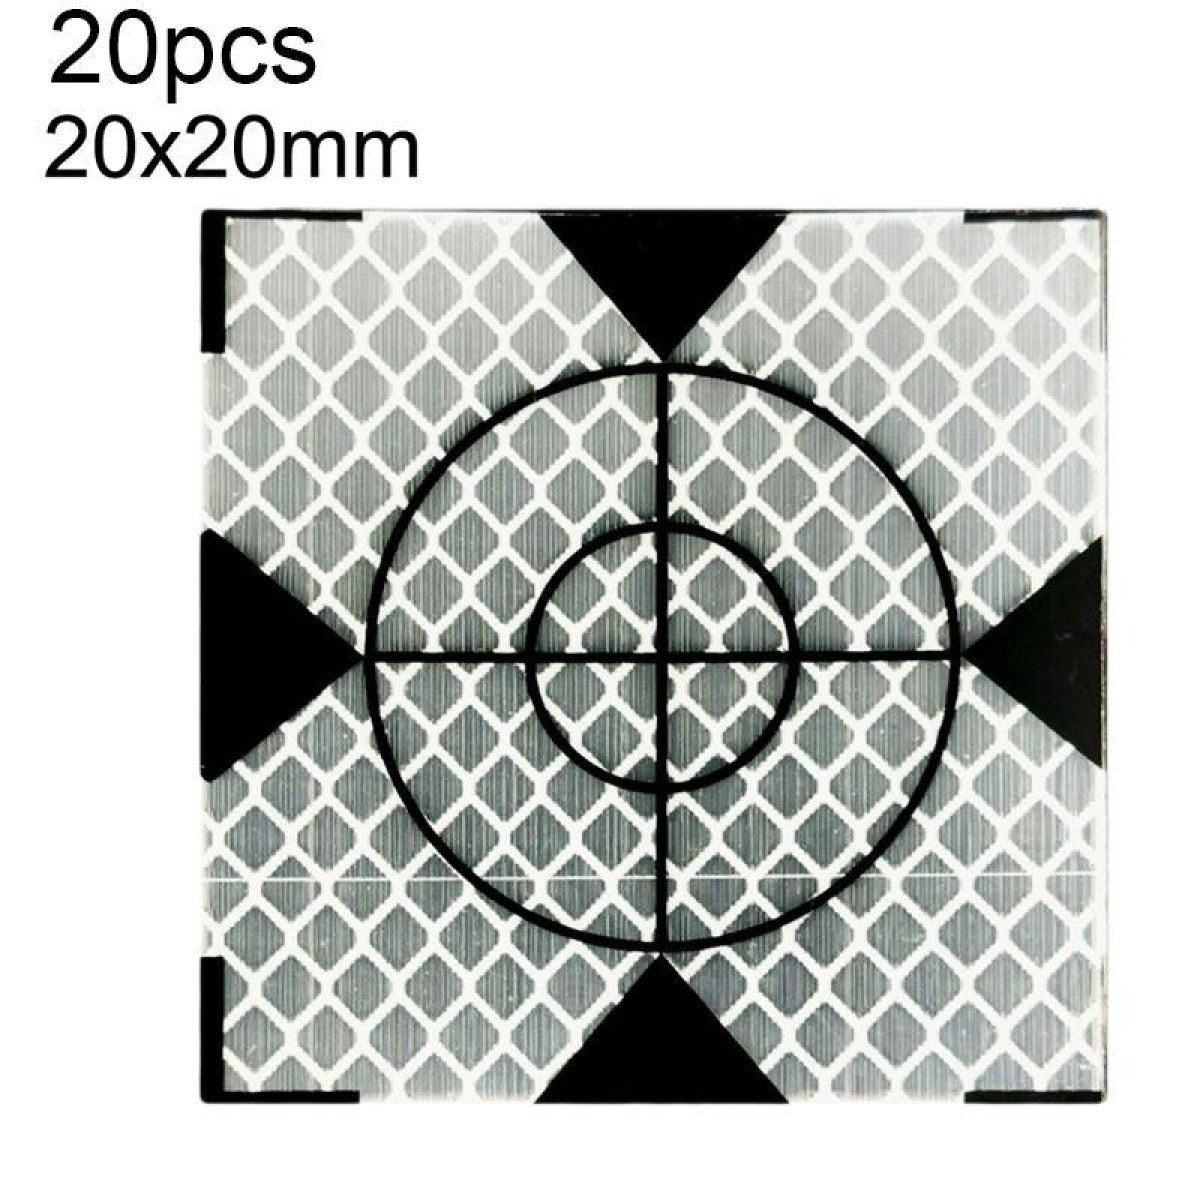 20pcs FP001 Diamond Tunnel Mapping Reflective Sticker Monitoring Measurement Point Sticker, Size: 20x20mm With Triangle